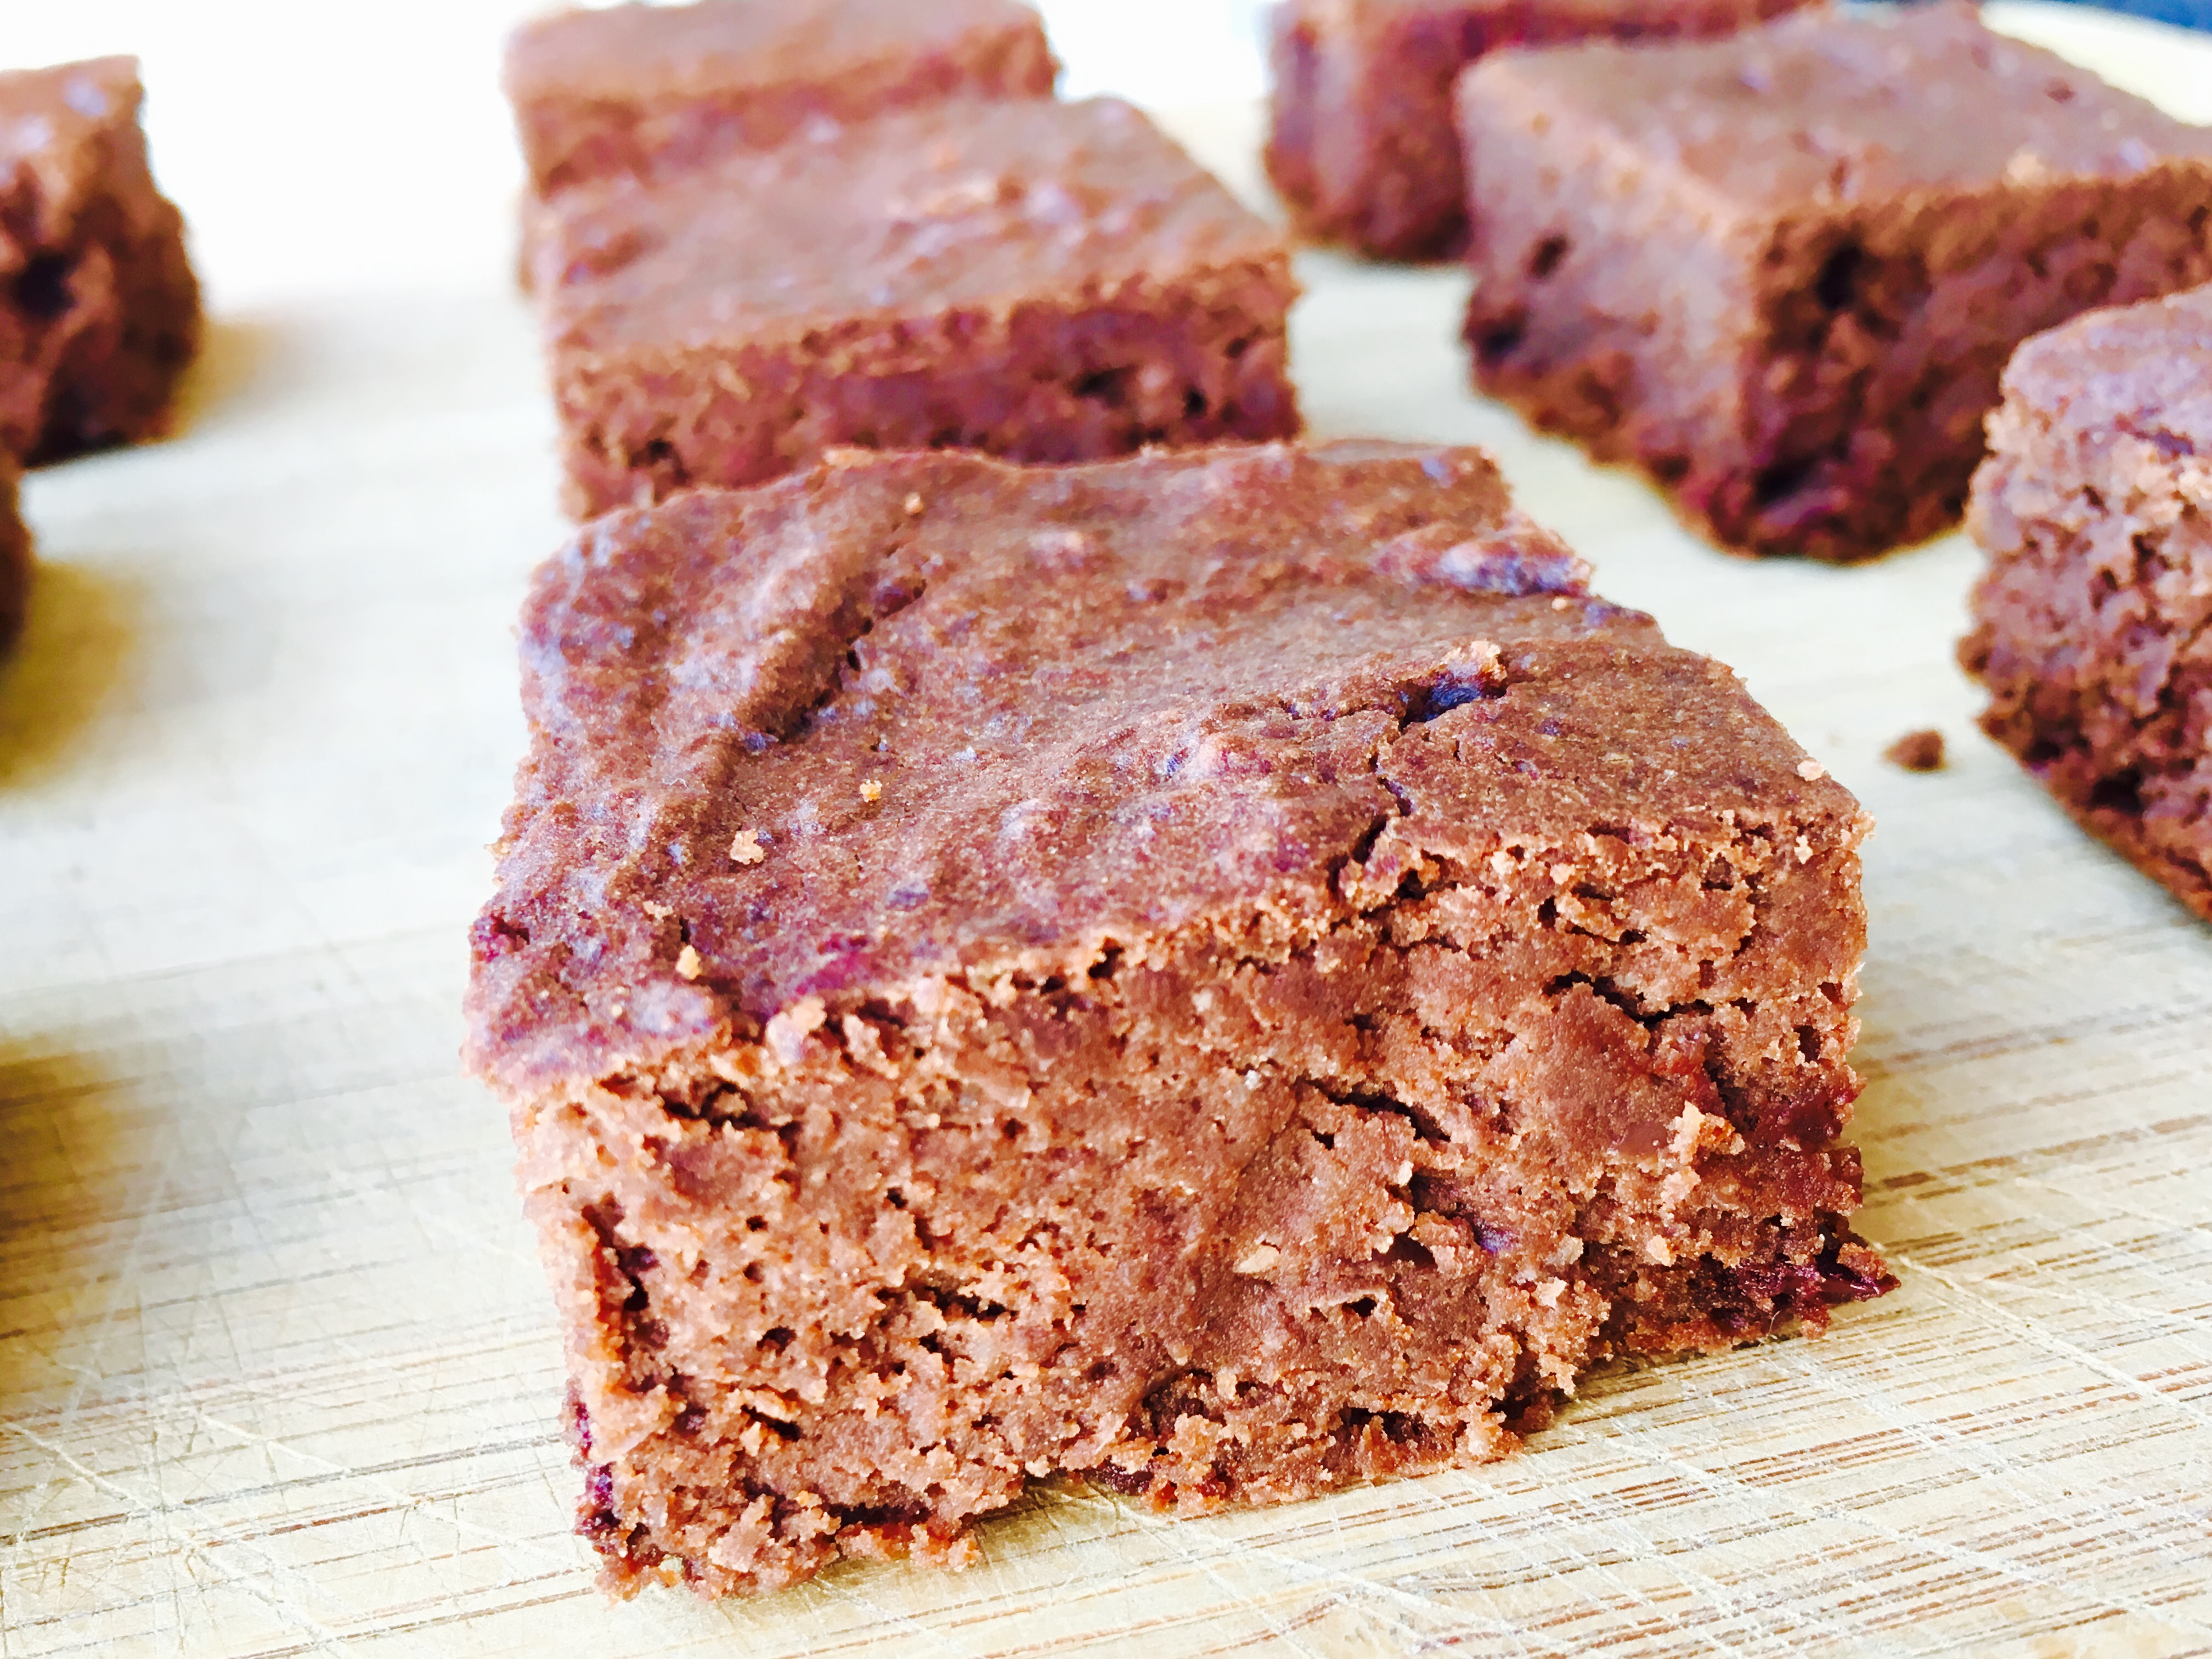 These Flourless Pinto Bean Brownies are gluten-free, sugar-free, and diary-free. And they're so good they'll fool your whole family!